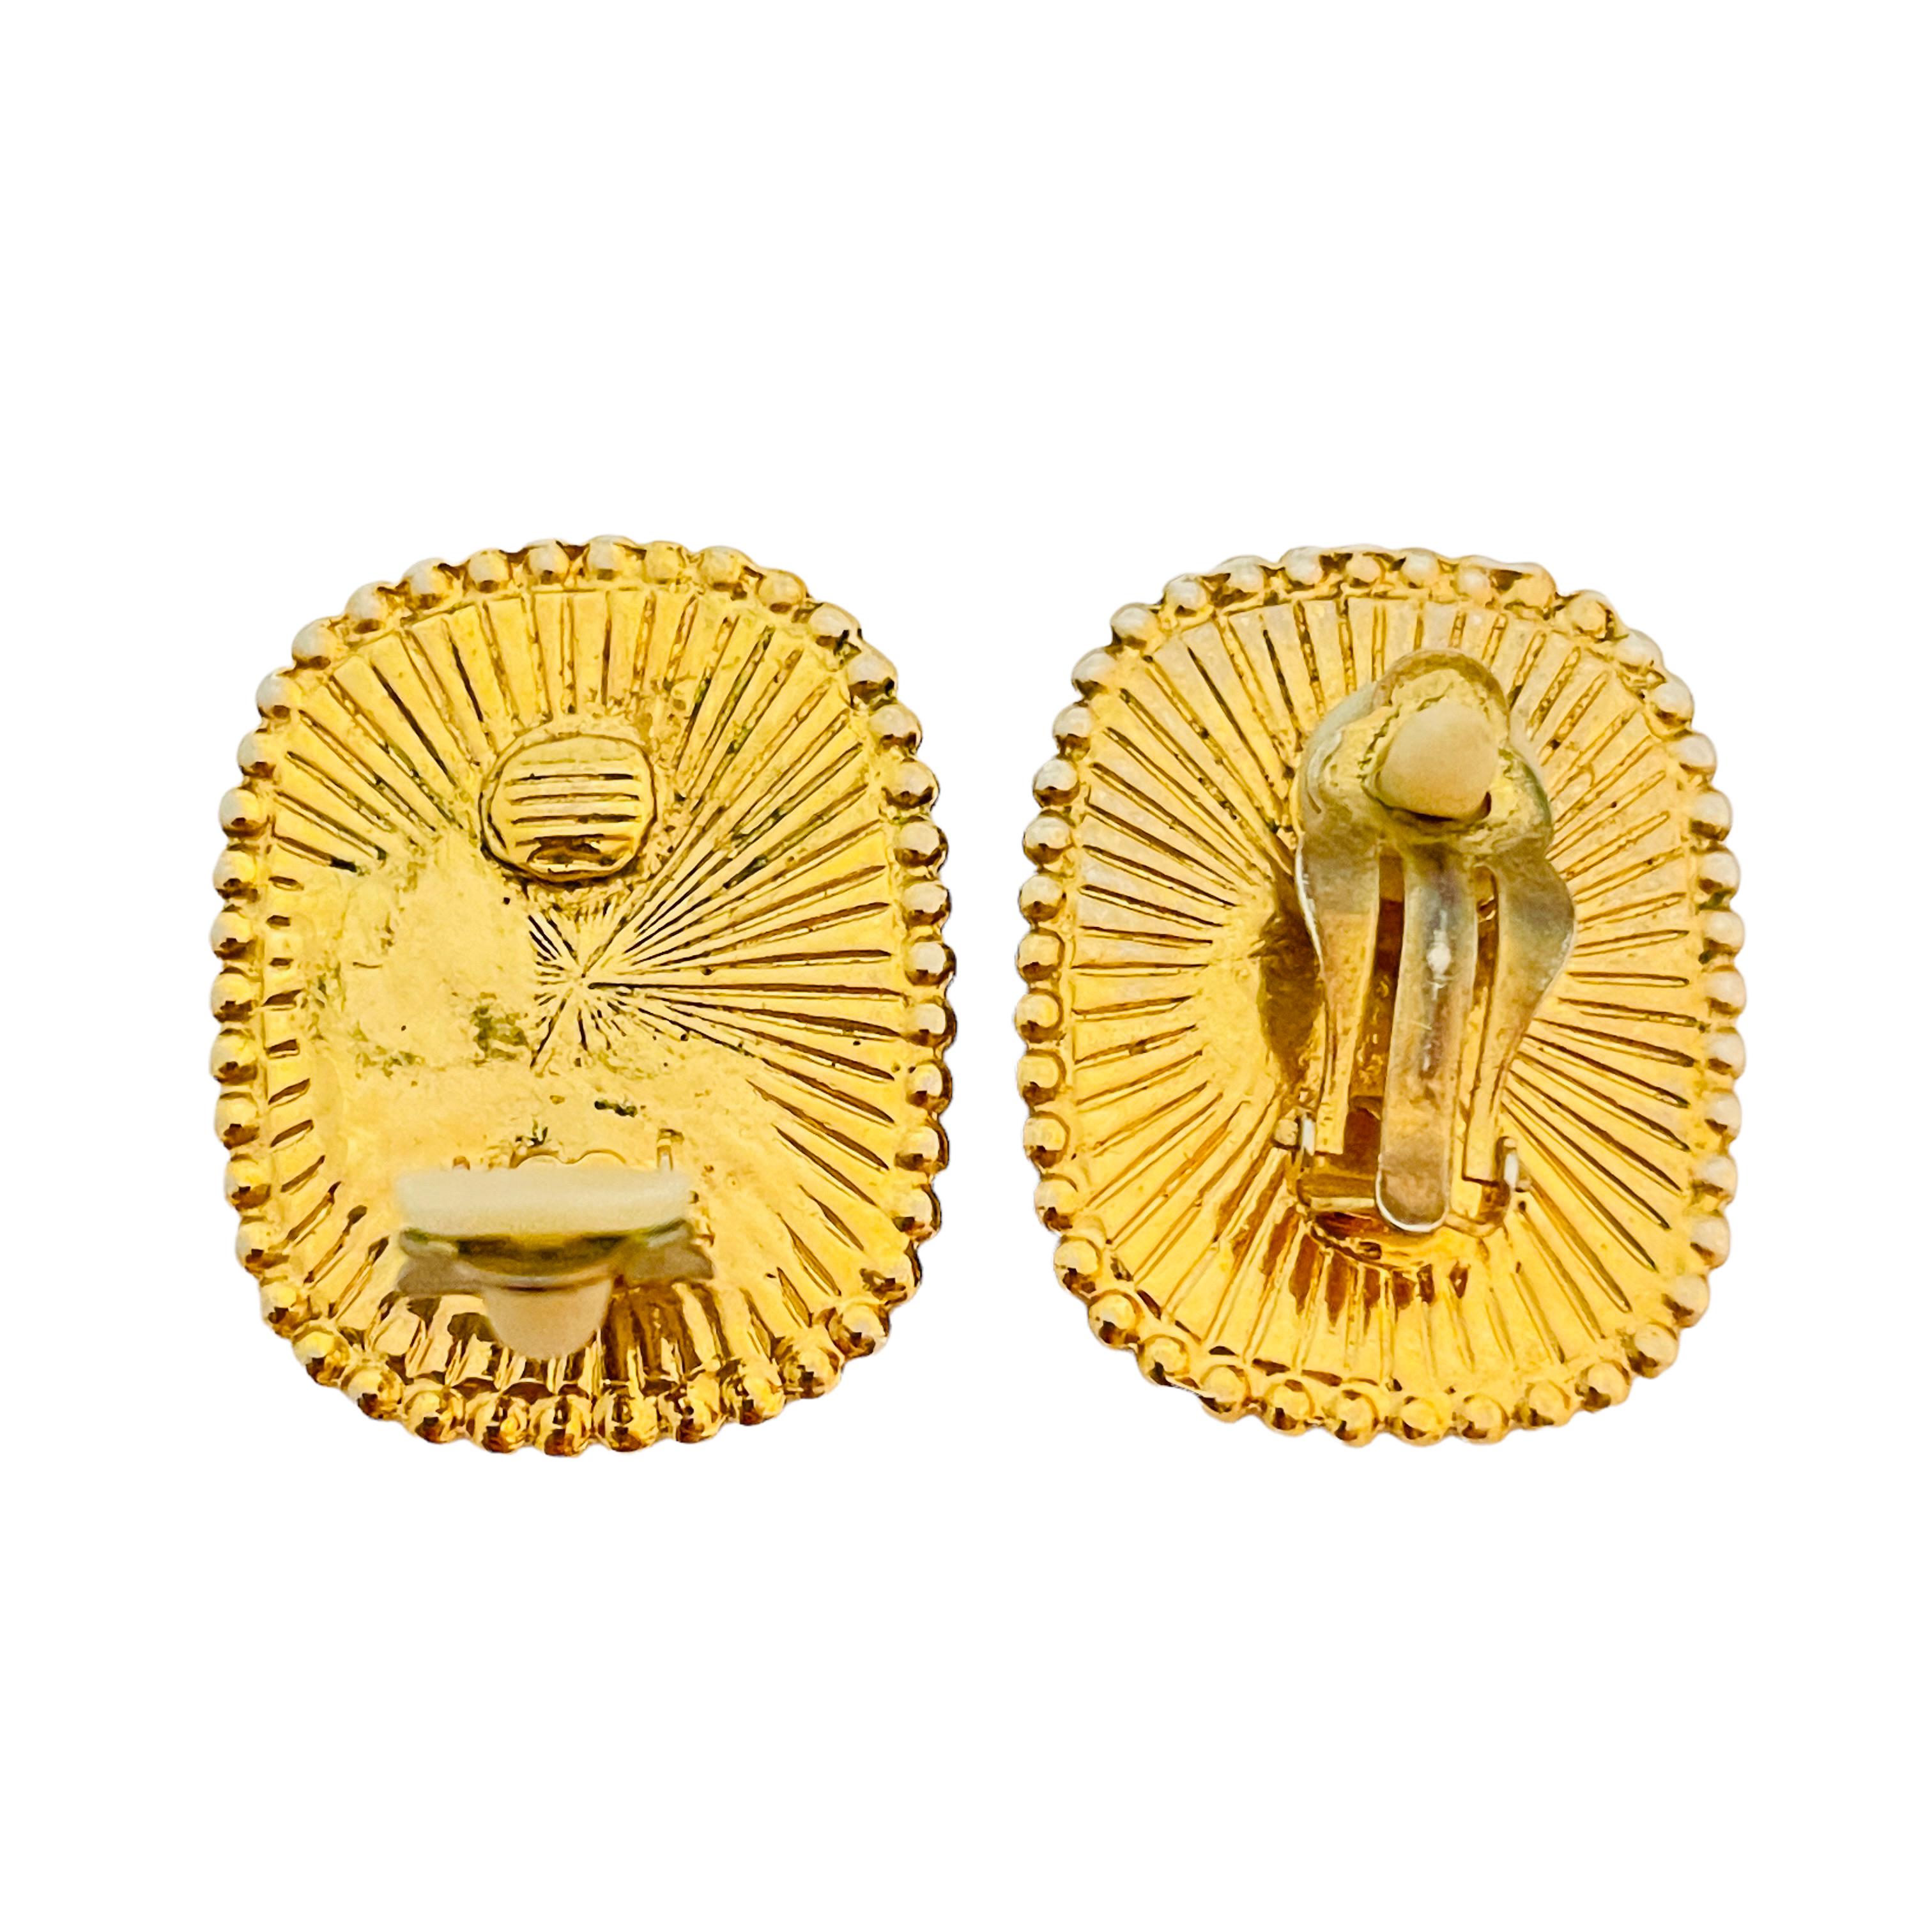 Vtg gold amber glass clip on earrings designer runway In Good Condition For Sale In Palos Hills, IL